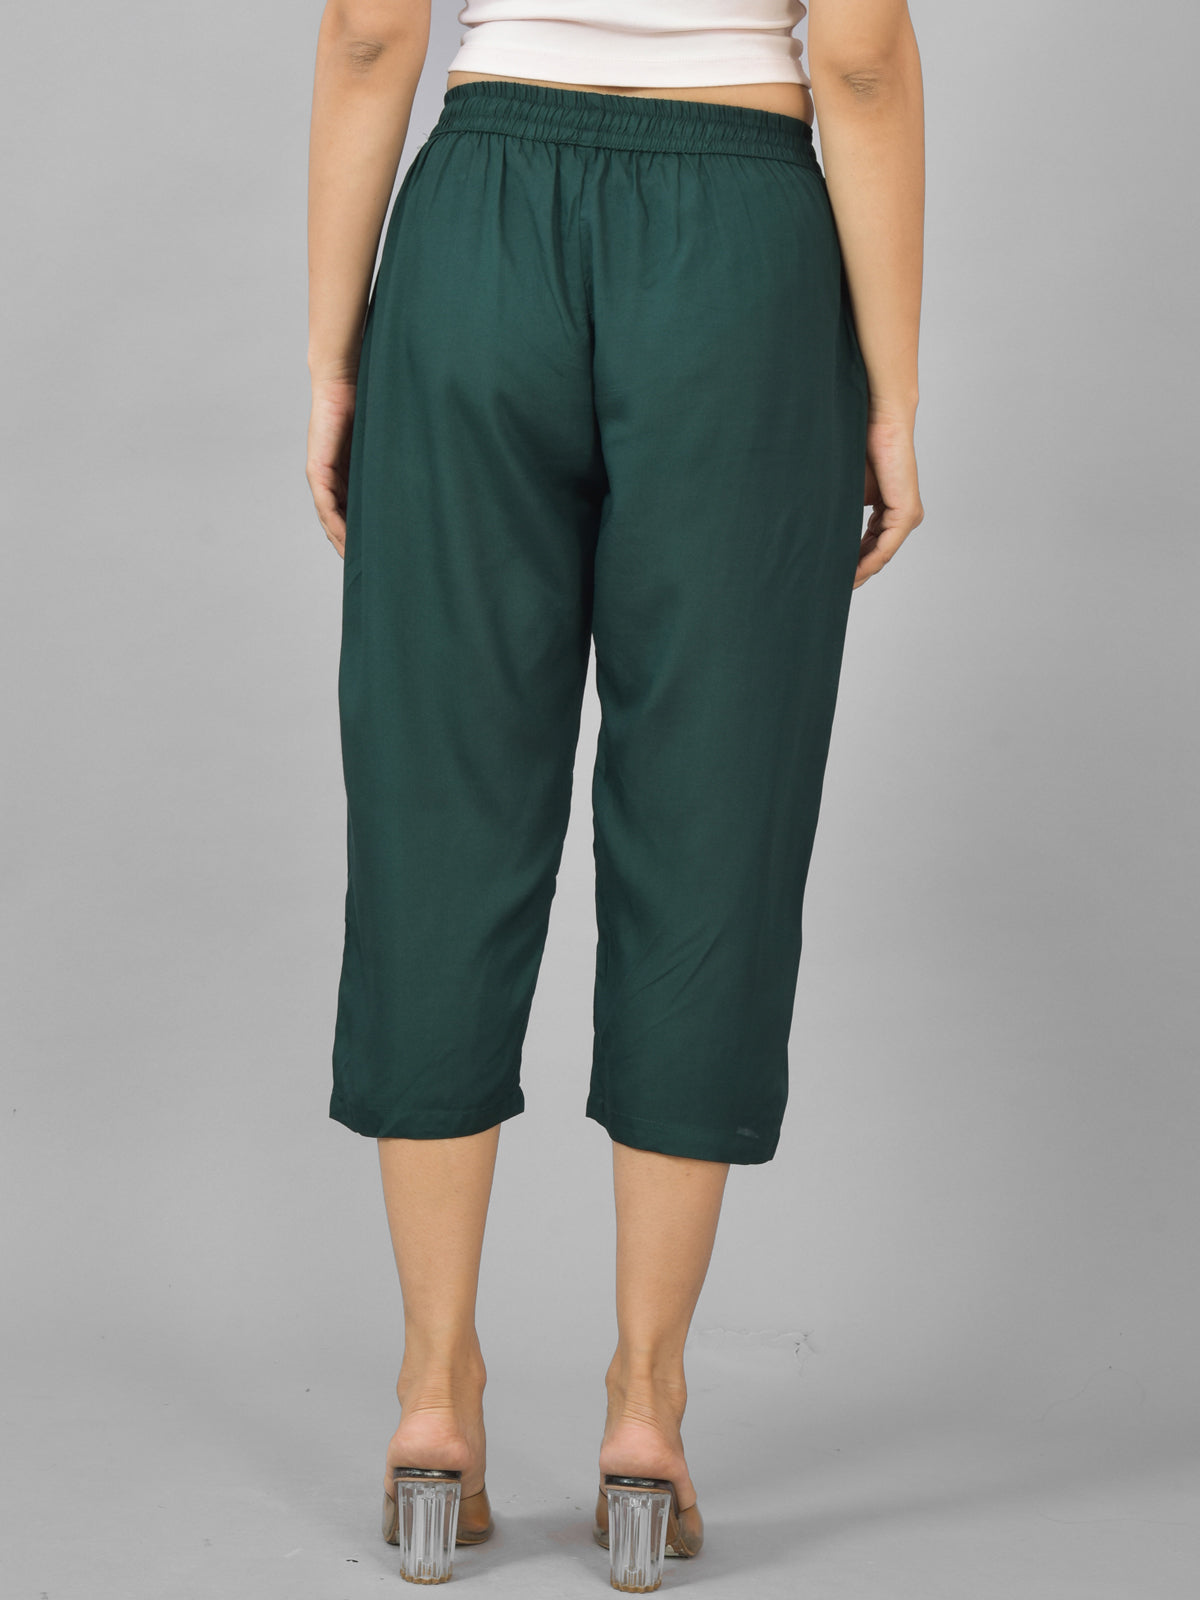 Pack Of 2 Womens Dark Green And Teal Blue Calf Length Rayon Culottes Trouser Combo